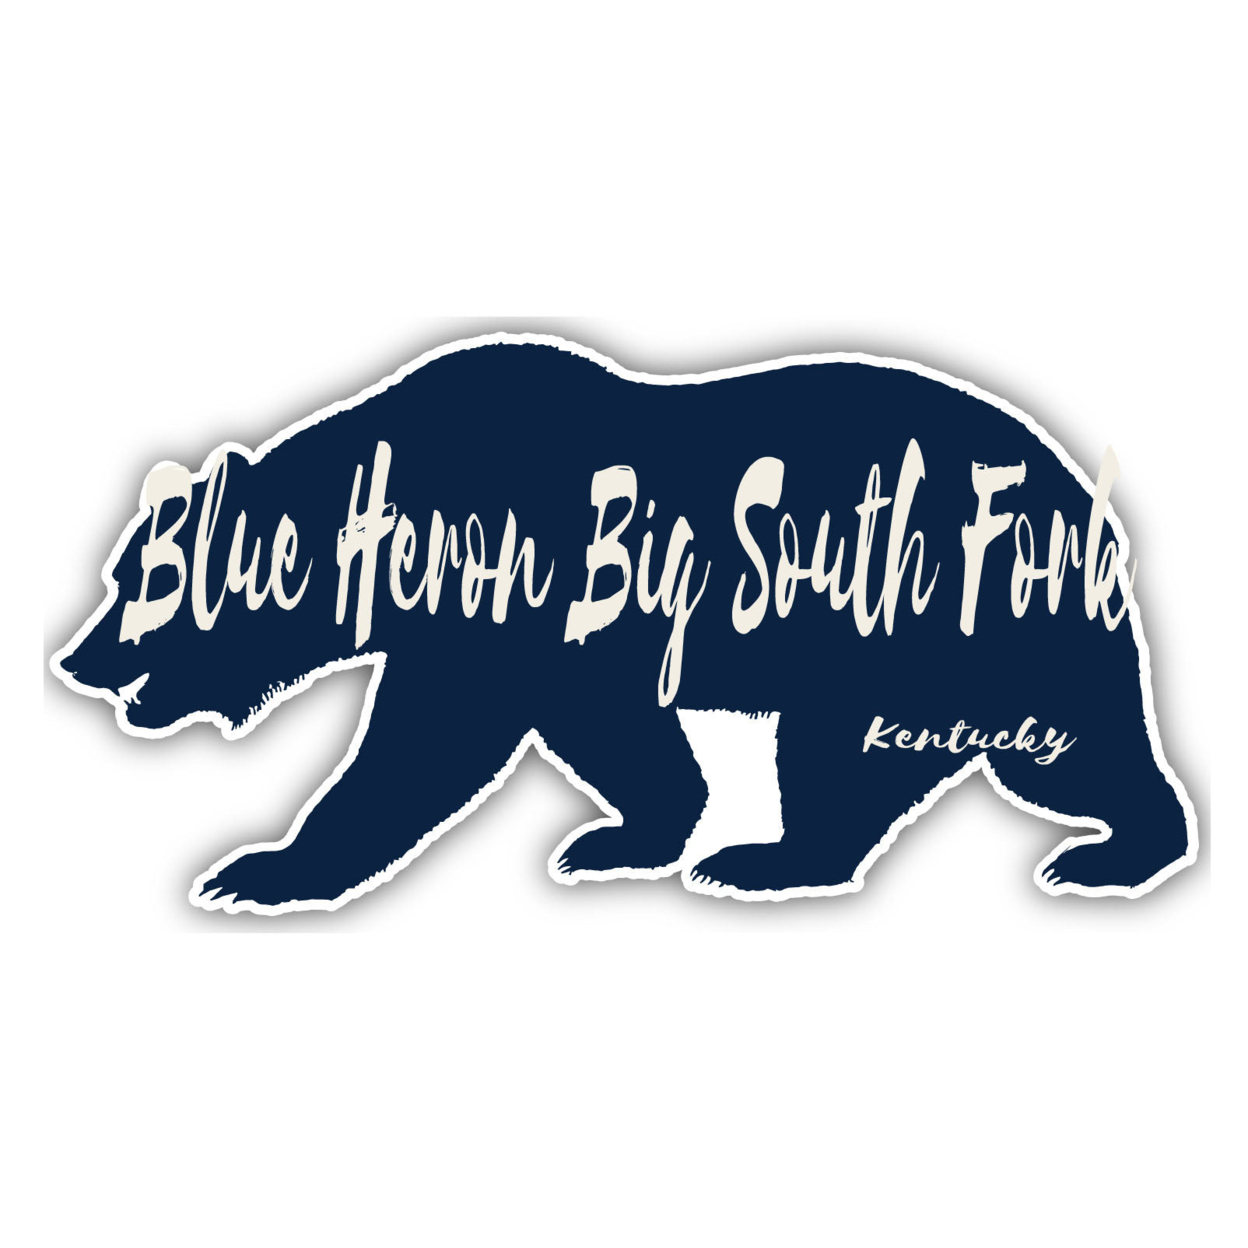 Blue Heron Big South Fork Kentucky Souvenir Decorative Stickers (Choose Theme And Size) - 4-Pack, 2-Inch, Bear